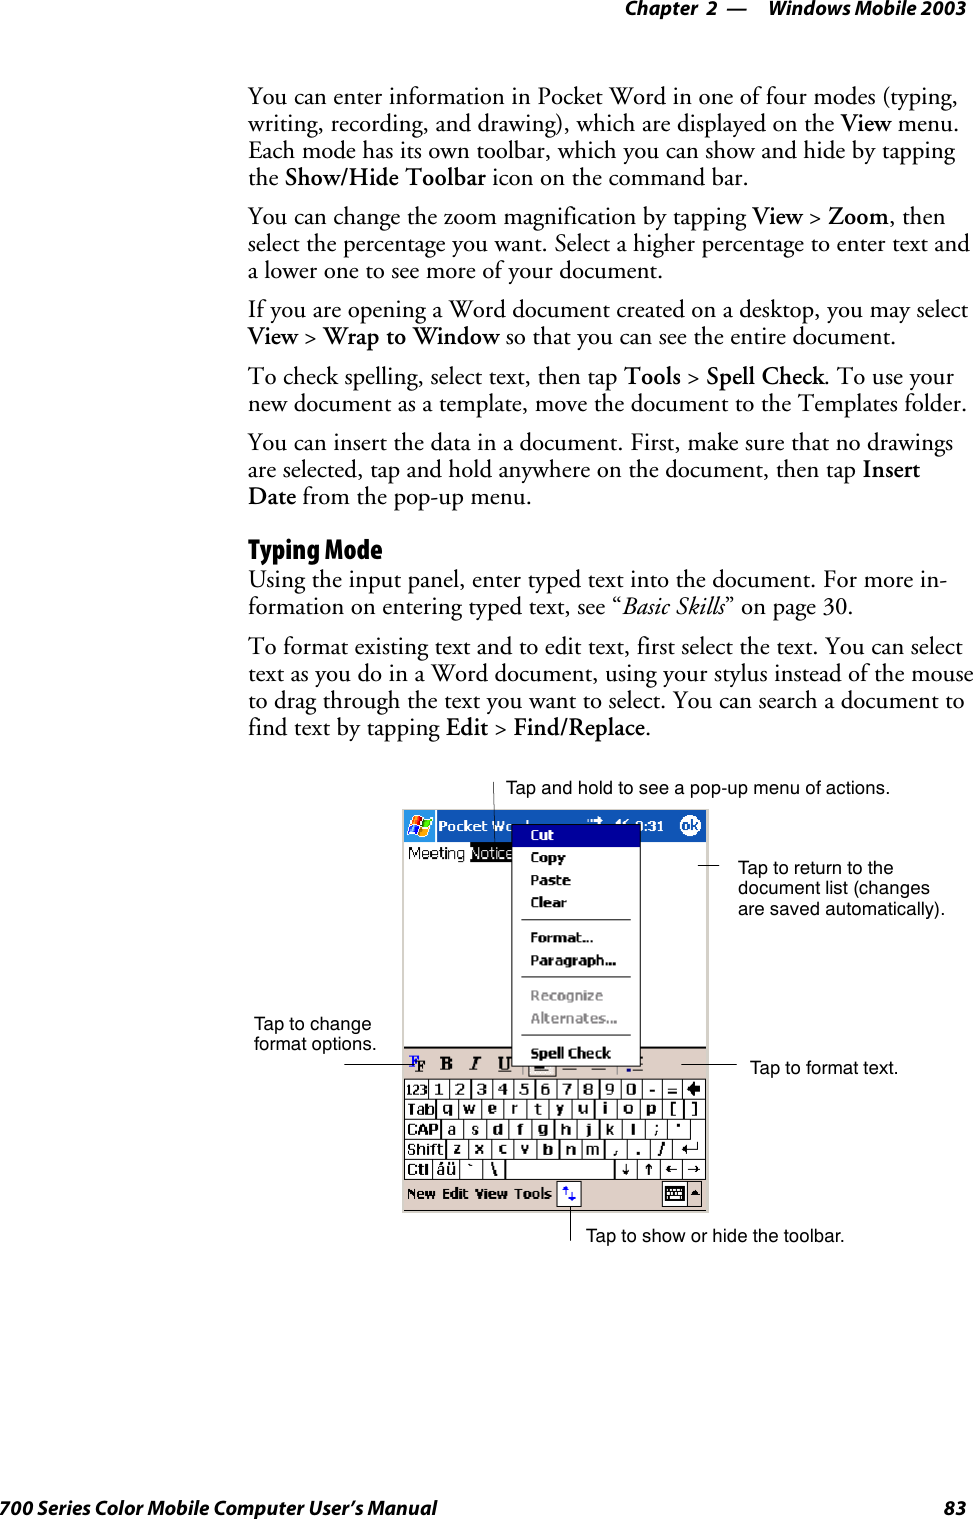 Windows Mobile 2003—Chapter 283700 Series Color Mobile Computer User’s ManualYou can enter information in Pocket Word in one of four modes (typing,writing, recording, and drawing), which are displayed on the View menu.Each mode has its own toolbar, which you can show and hide by tappingthe Show/Hide Toolbar icon on the command bar.You can change the zoom magnification by tapping View &gt;Zoom,thenselect the percentage you want. Select a higher percentage to enter text anda lower one to see more of your document.If you are opening a Word document created on a desktop, you may selectView &gt;Wrap to Window so that you can see the entire document.To check spelling, select text, then tap Tools &gt;Spell Check.Touseyournew document as a template, move the document to the Templates folder.You can insert the data in a document. First, make sure that no drawingsare selected, tap and hold anywhere on the document, then tap InsertDate from the pop-up menu.Typing ModeUsing the input panel, enter typed text into the document. For more in-formation on entering typed text, see “Basic Skills” on page 30.To format existing text and to edit text, first select the text. You can selecttext as you do in a Word document, using your stylus instead of the mouseto drag through the text you want to select. You can search a document tofind text by tapping Edit &gt;Find/Replace.Tap to show or hide the toolbar.Tap to changeformat options.Taptoformattext.Taptoreturntothedocument list (changesare saved automatically).Tap and hold to see a pop-up menu of actions.